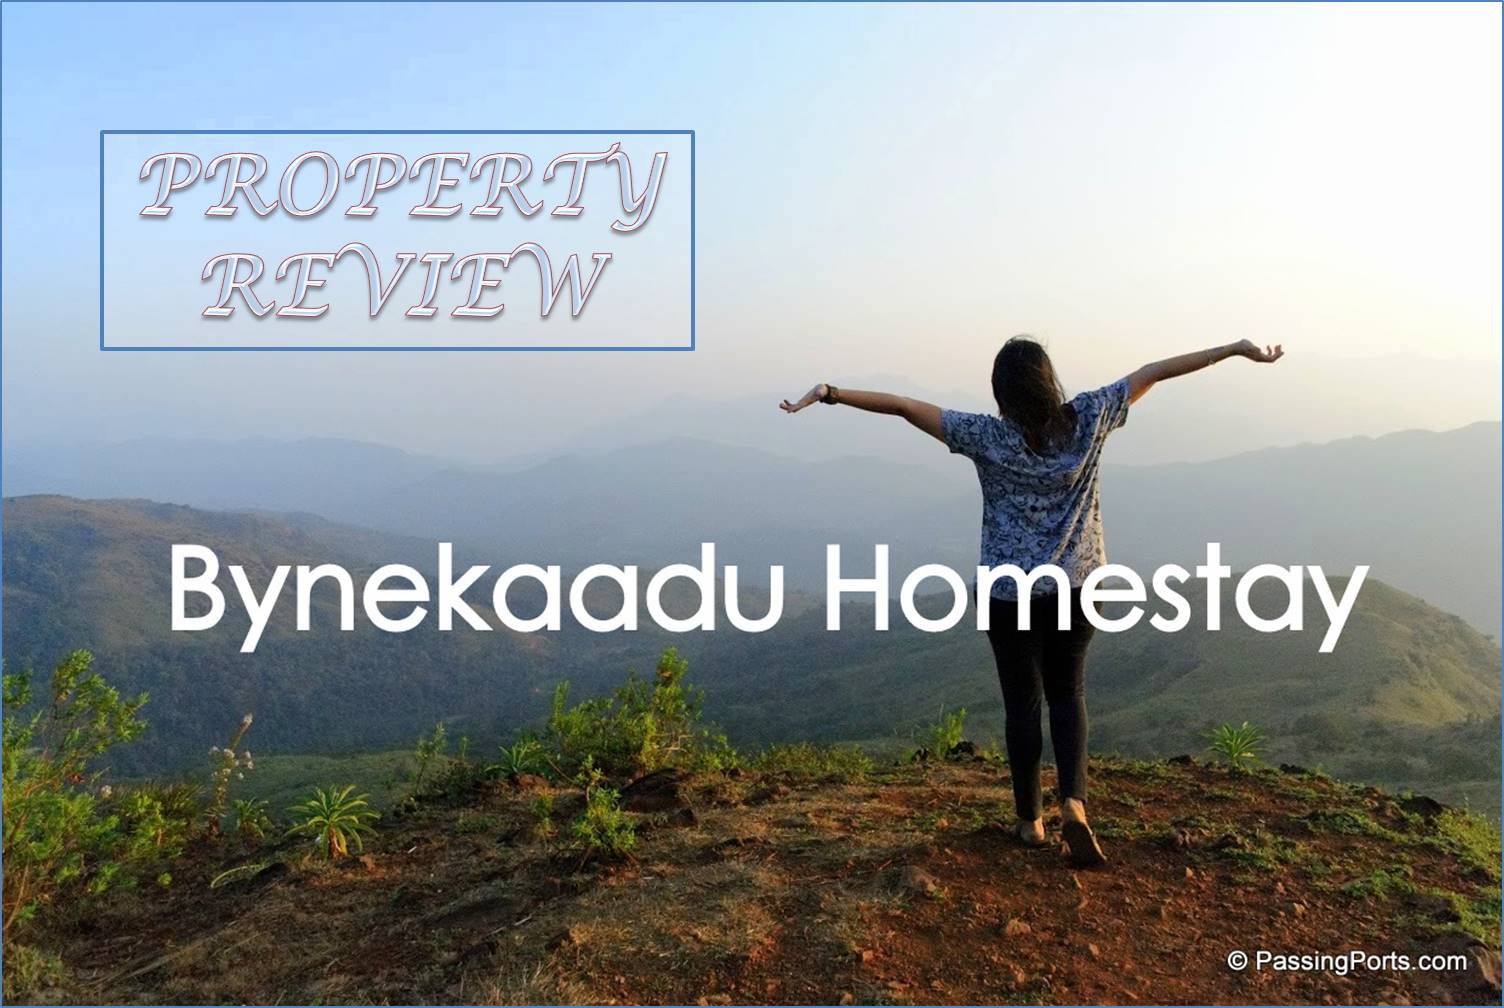 Review of the homestay